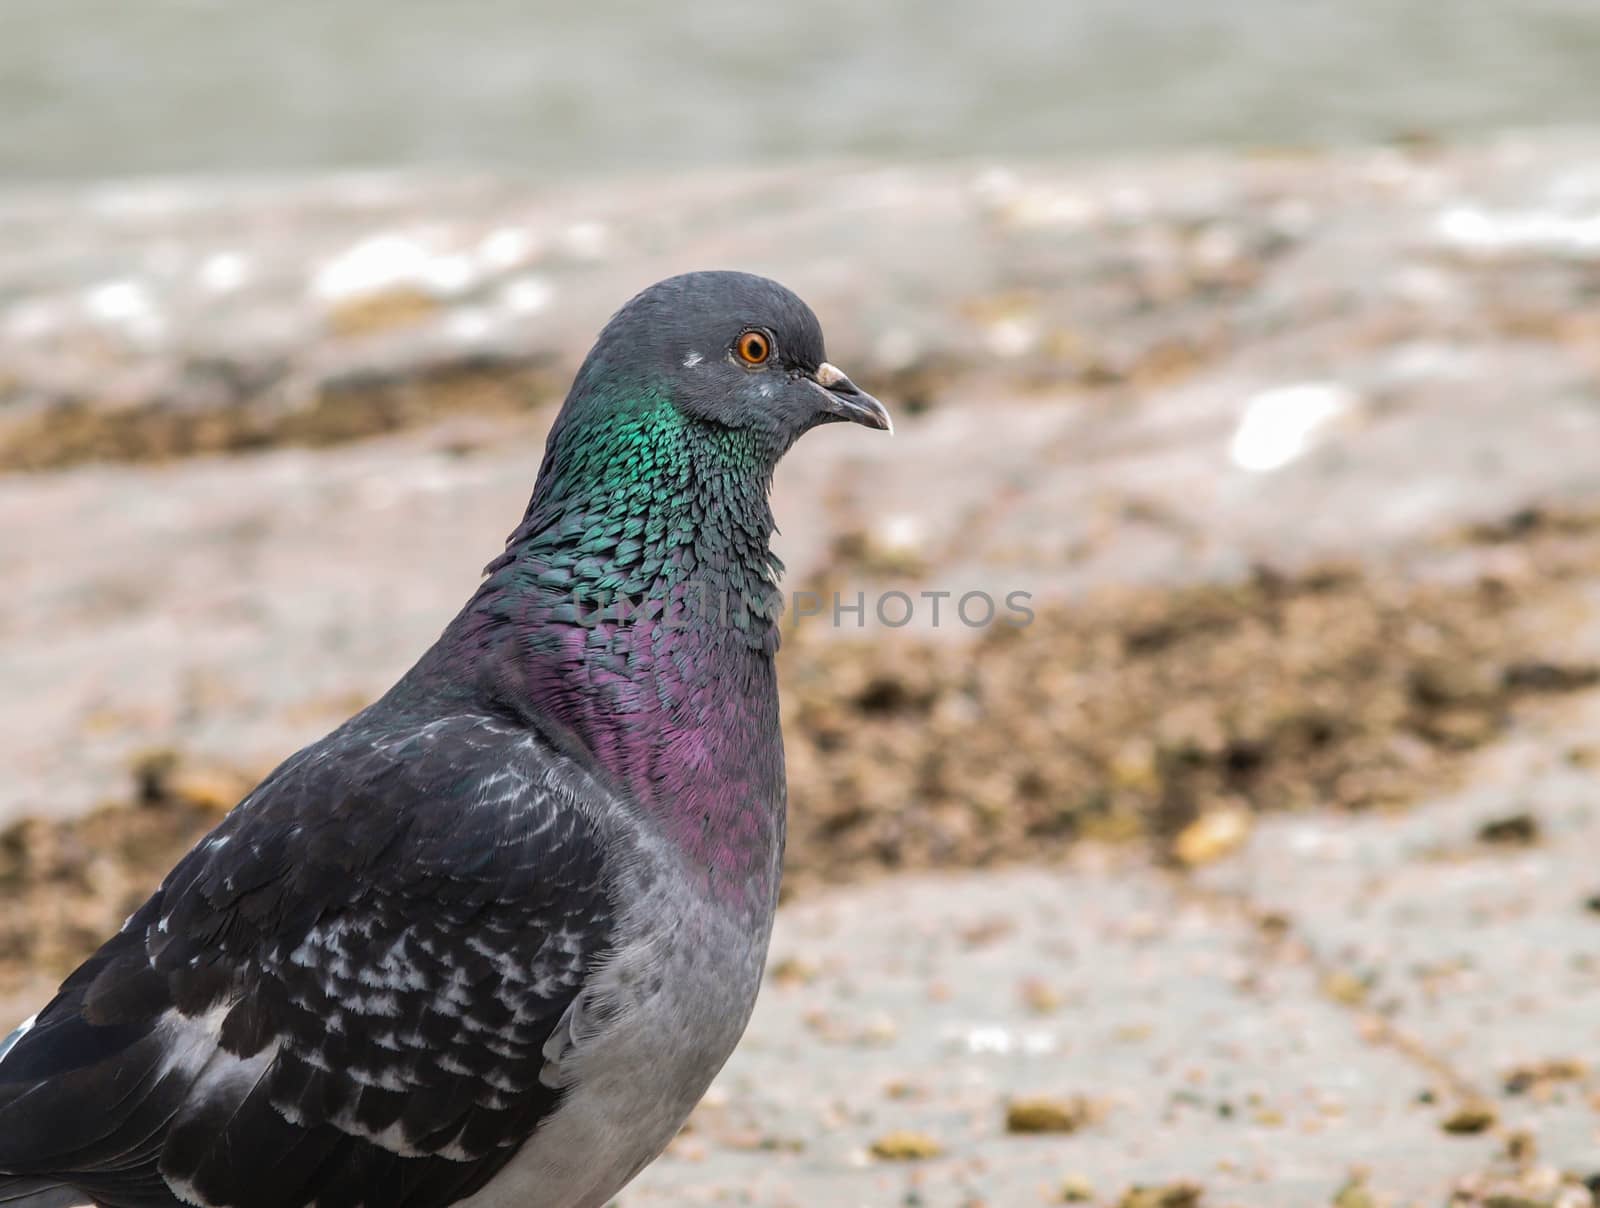 Blue-green pigeon in front of green water, on top of a cliff